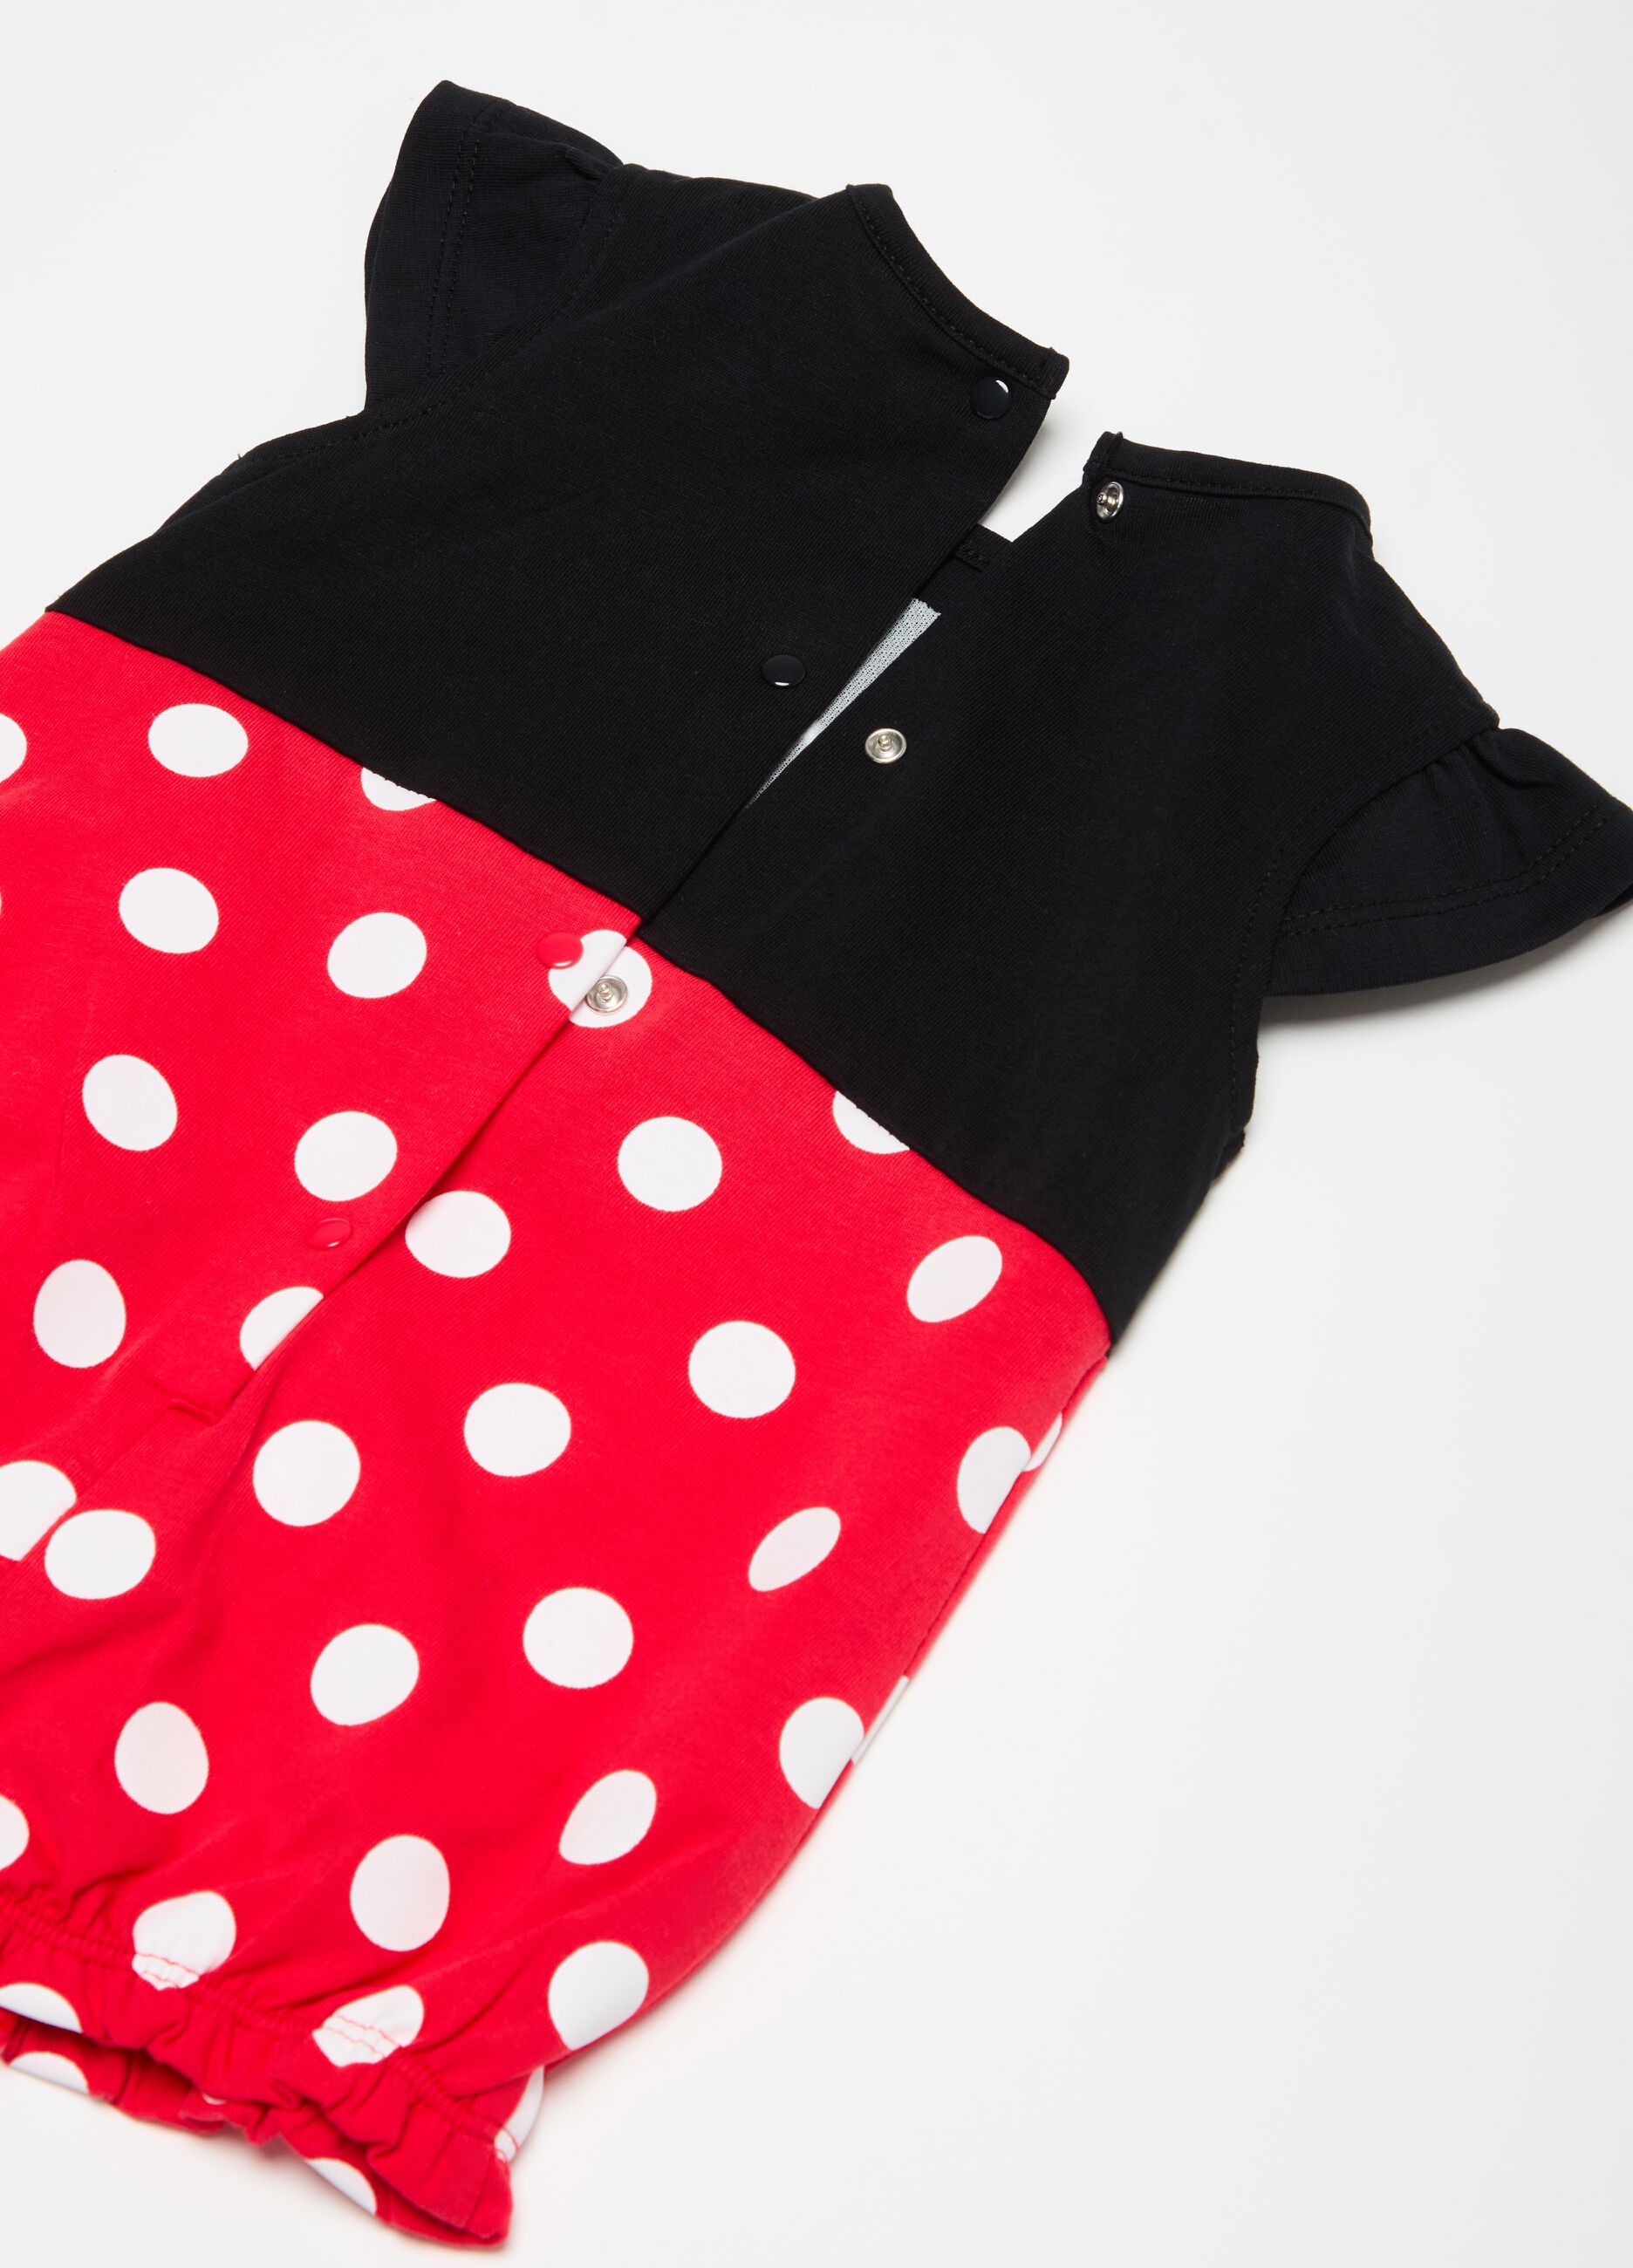 Minnie Mouse bodysuit and hat set